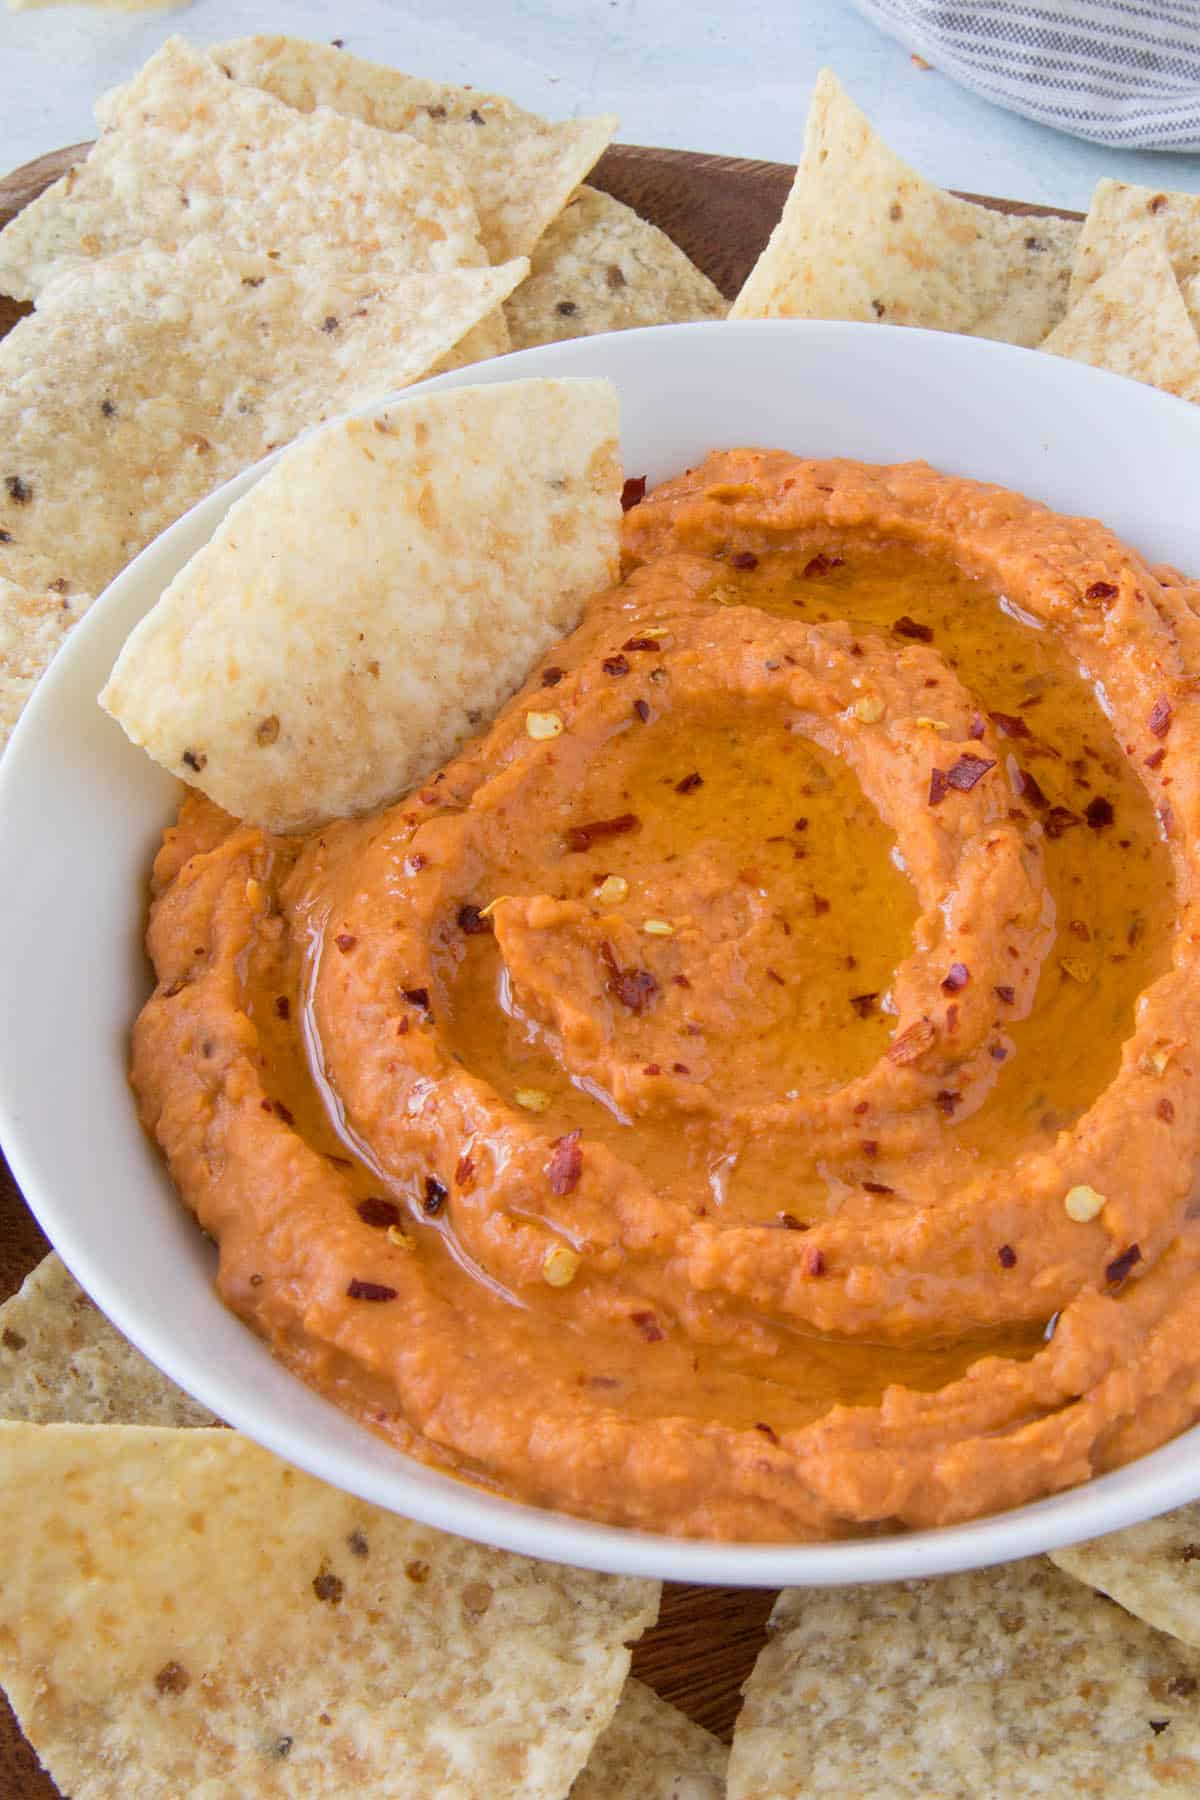 Creamy White Bean Dip with Harissa, served with chips